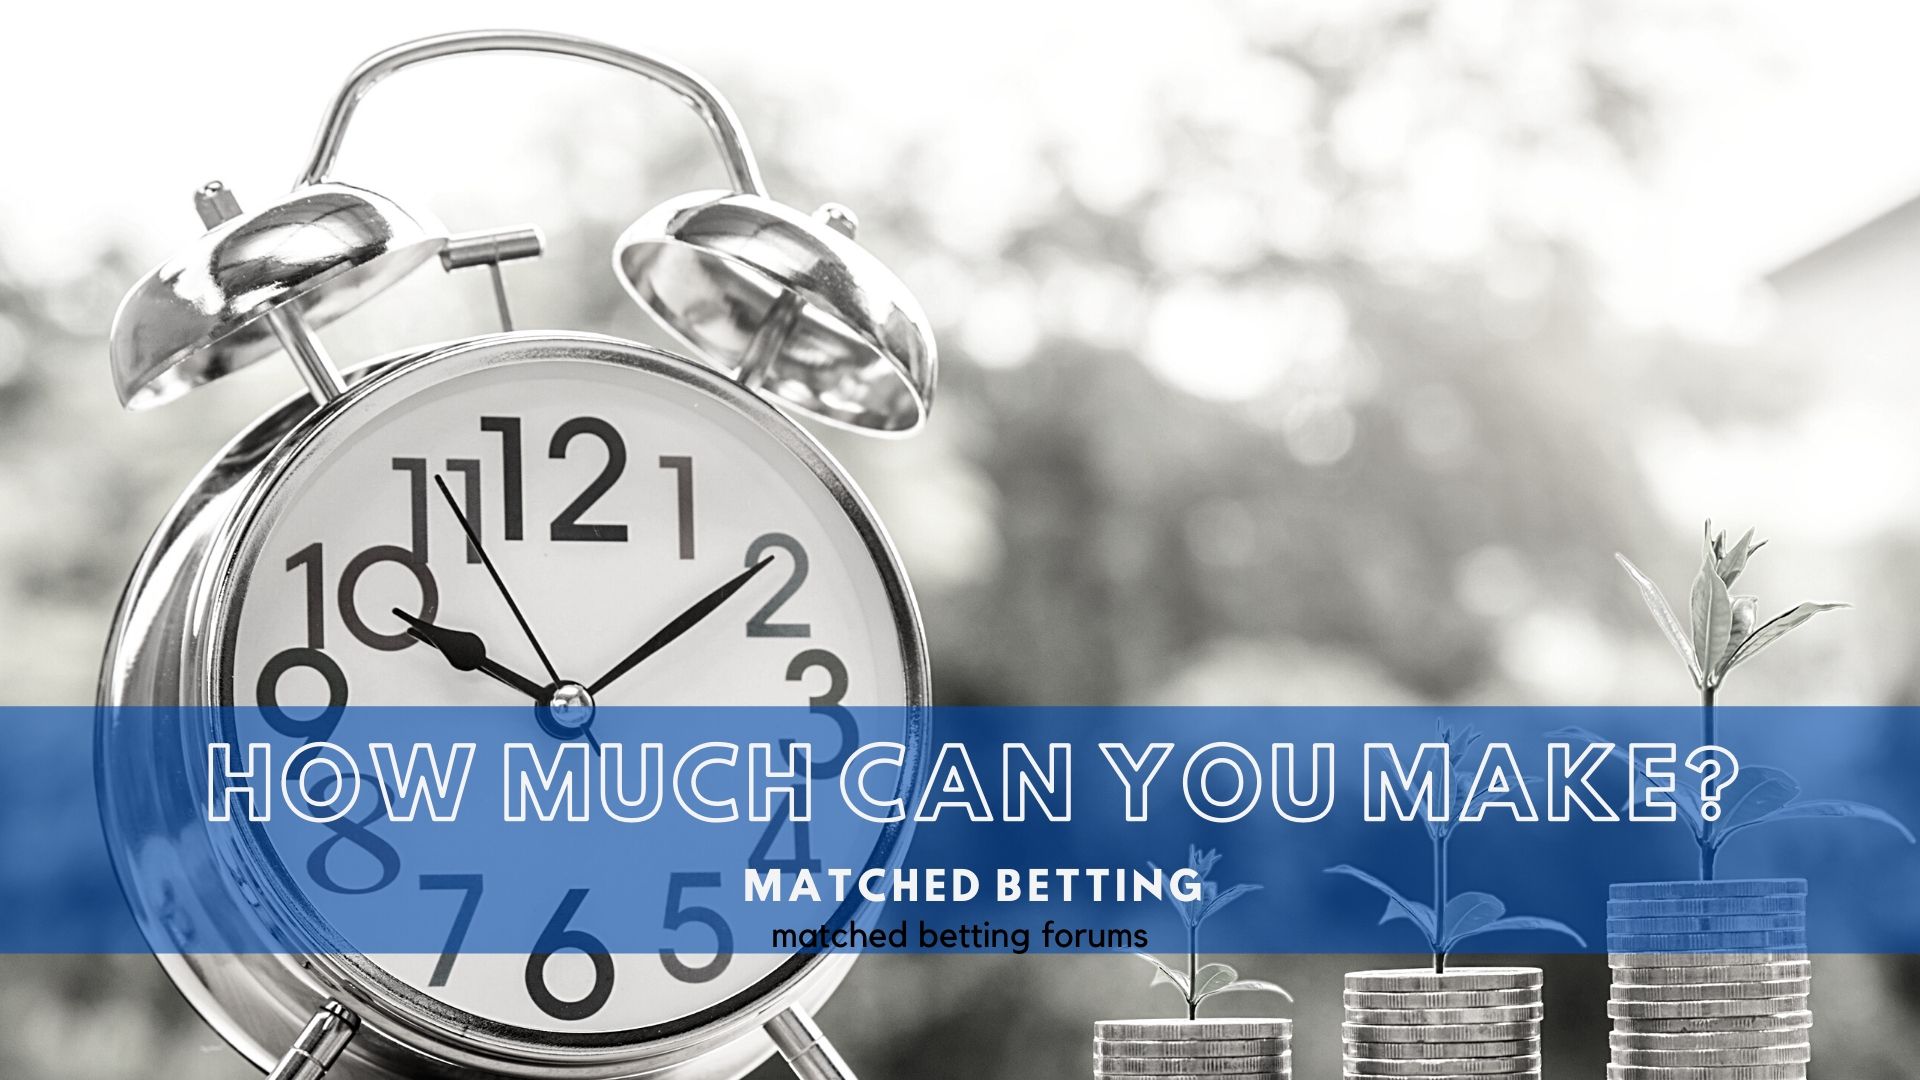 How much can you make from matched betting